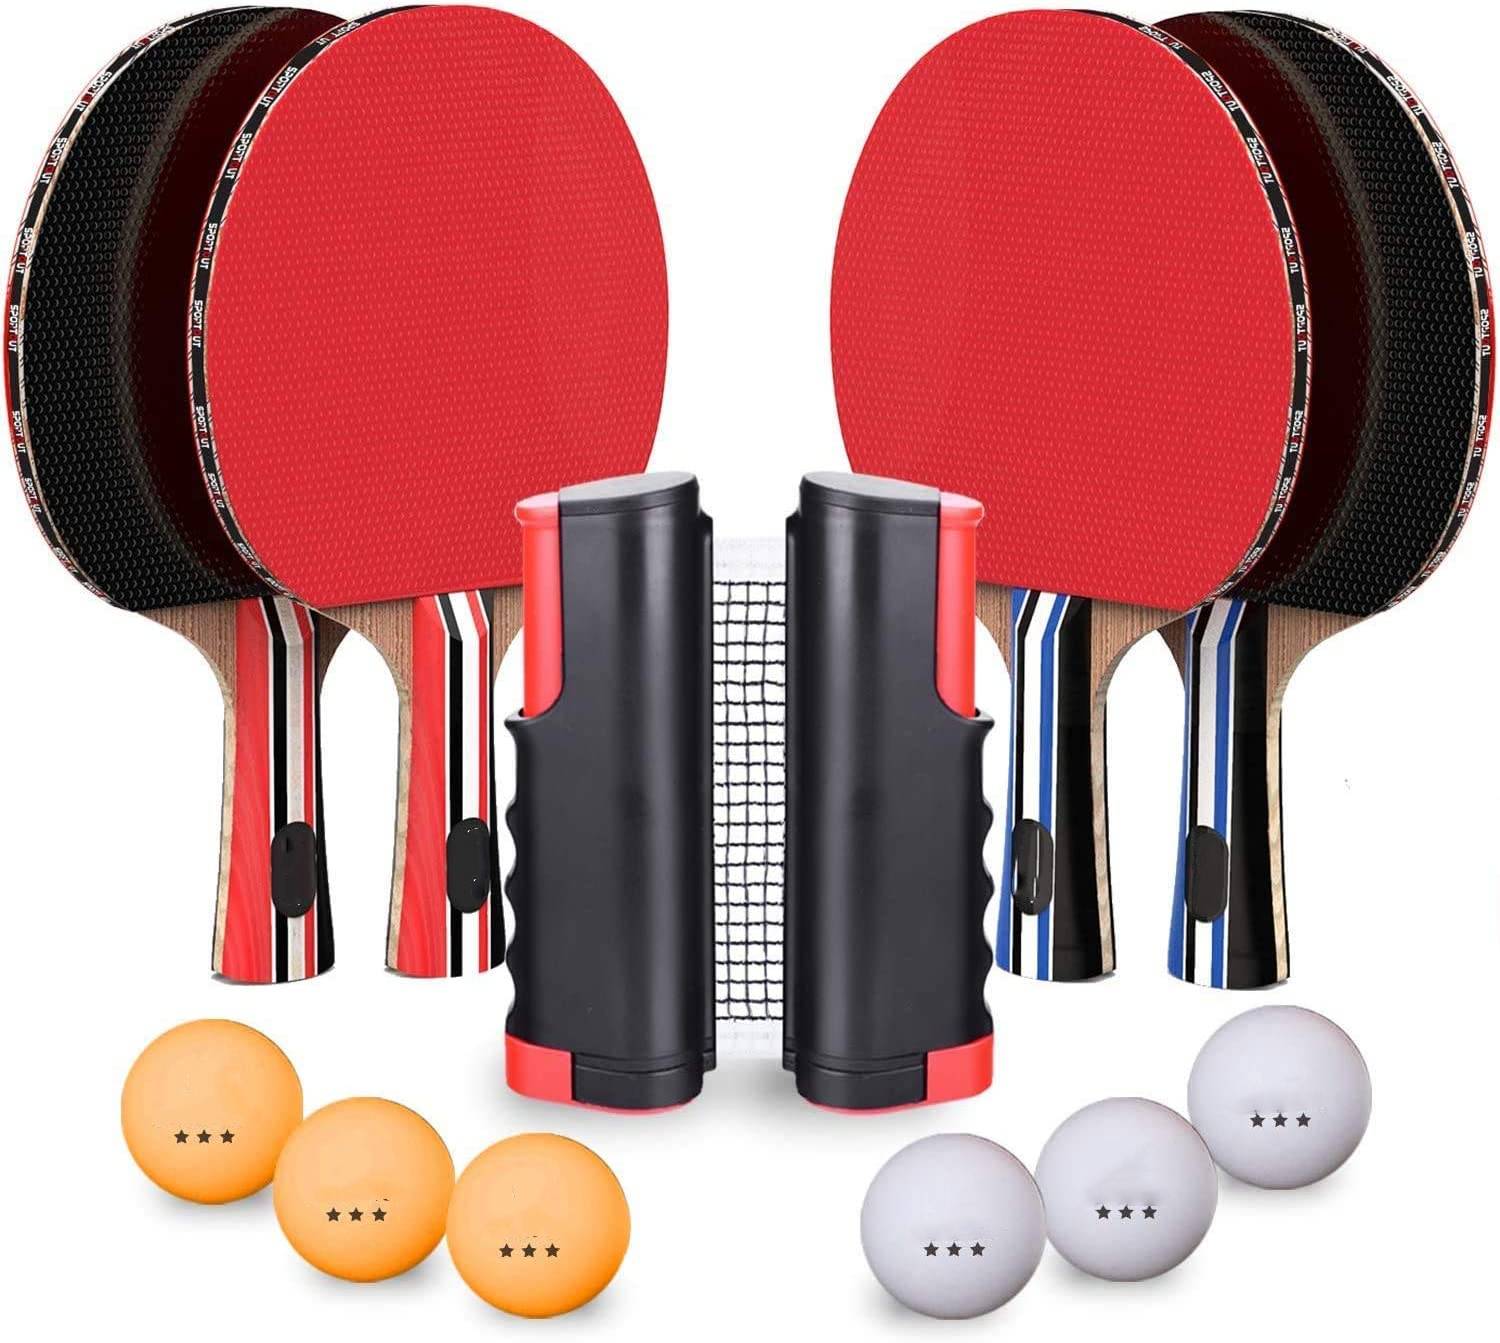 Wholesale factory price Recreational Ping Pong Paddle 0666, Sports Table Tennis Paddle - Unbreakable and Weather Resistant for Indoor/Outdoor